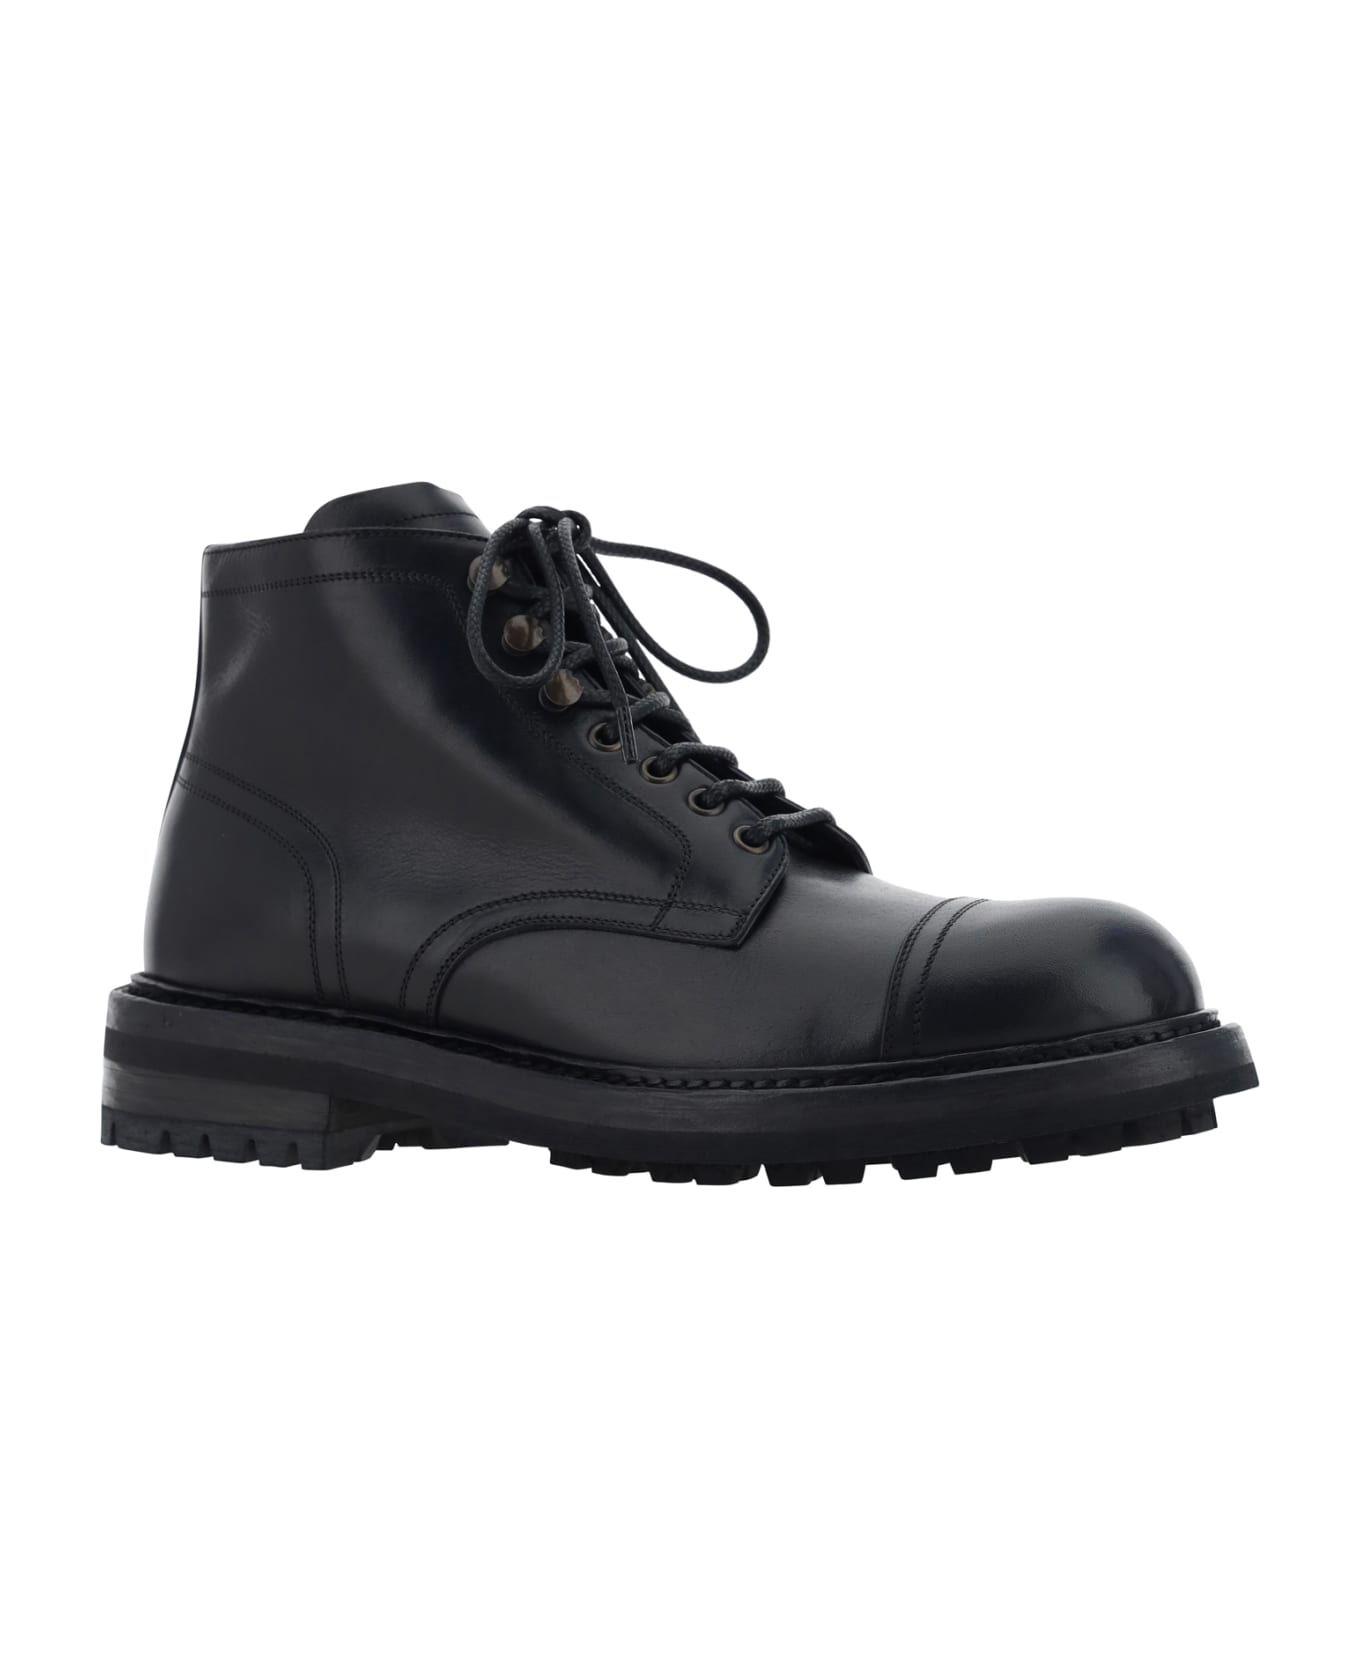 Dolce & Gabbana Lace-up Ankle Boots - Black